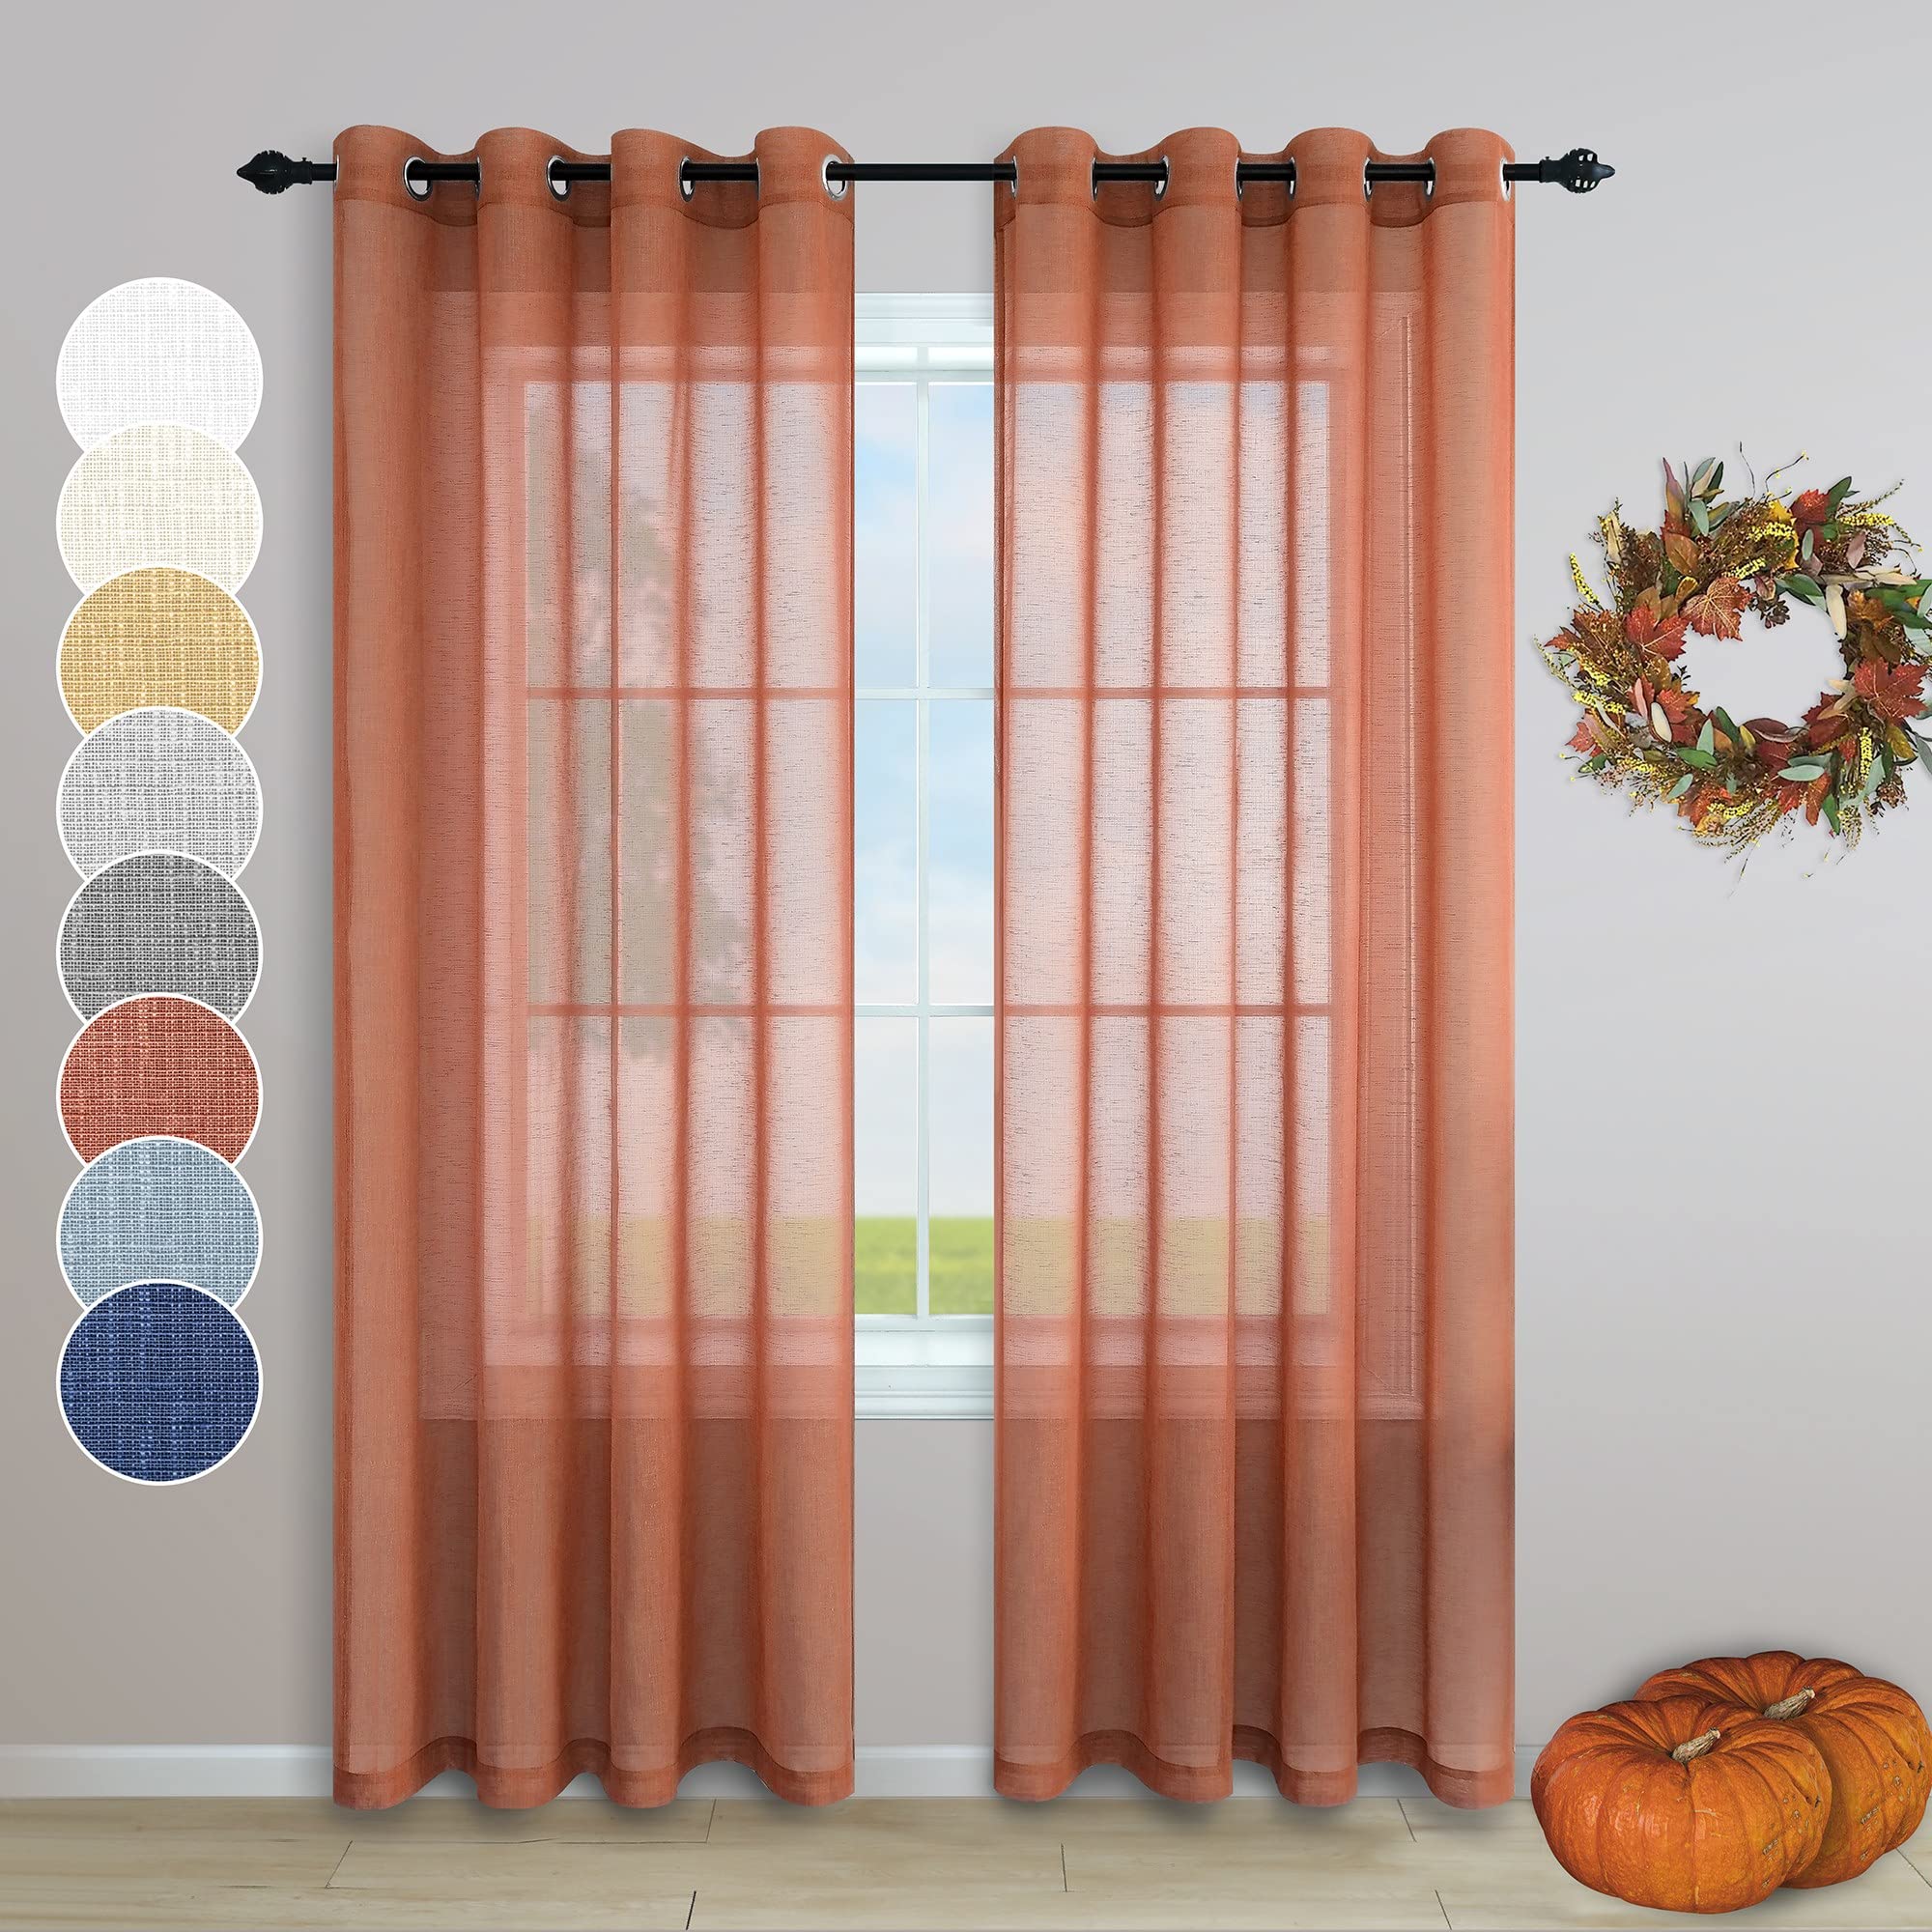 Pitalk Rust curtains 96 Inches Long for Living Room 2 Panels grommet Drape Linen Lightweight Flowy colored Semi Sheer girls Bedroom cur